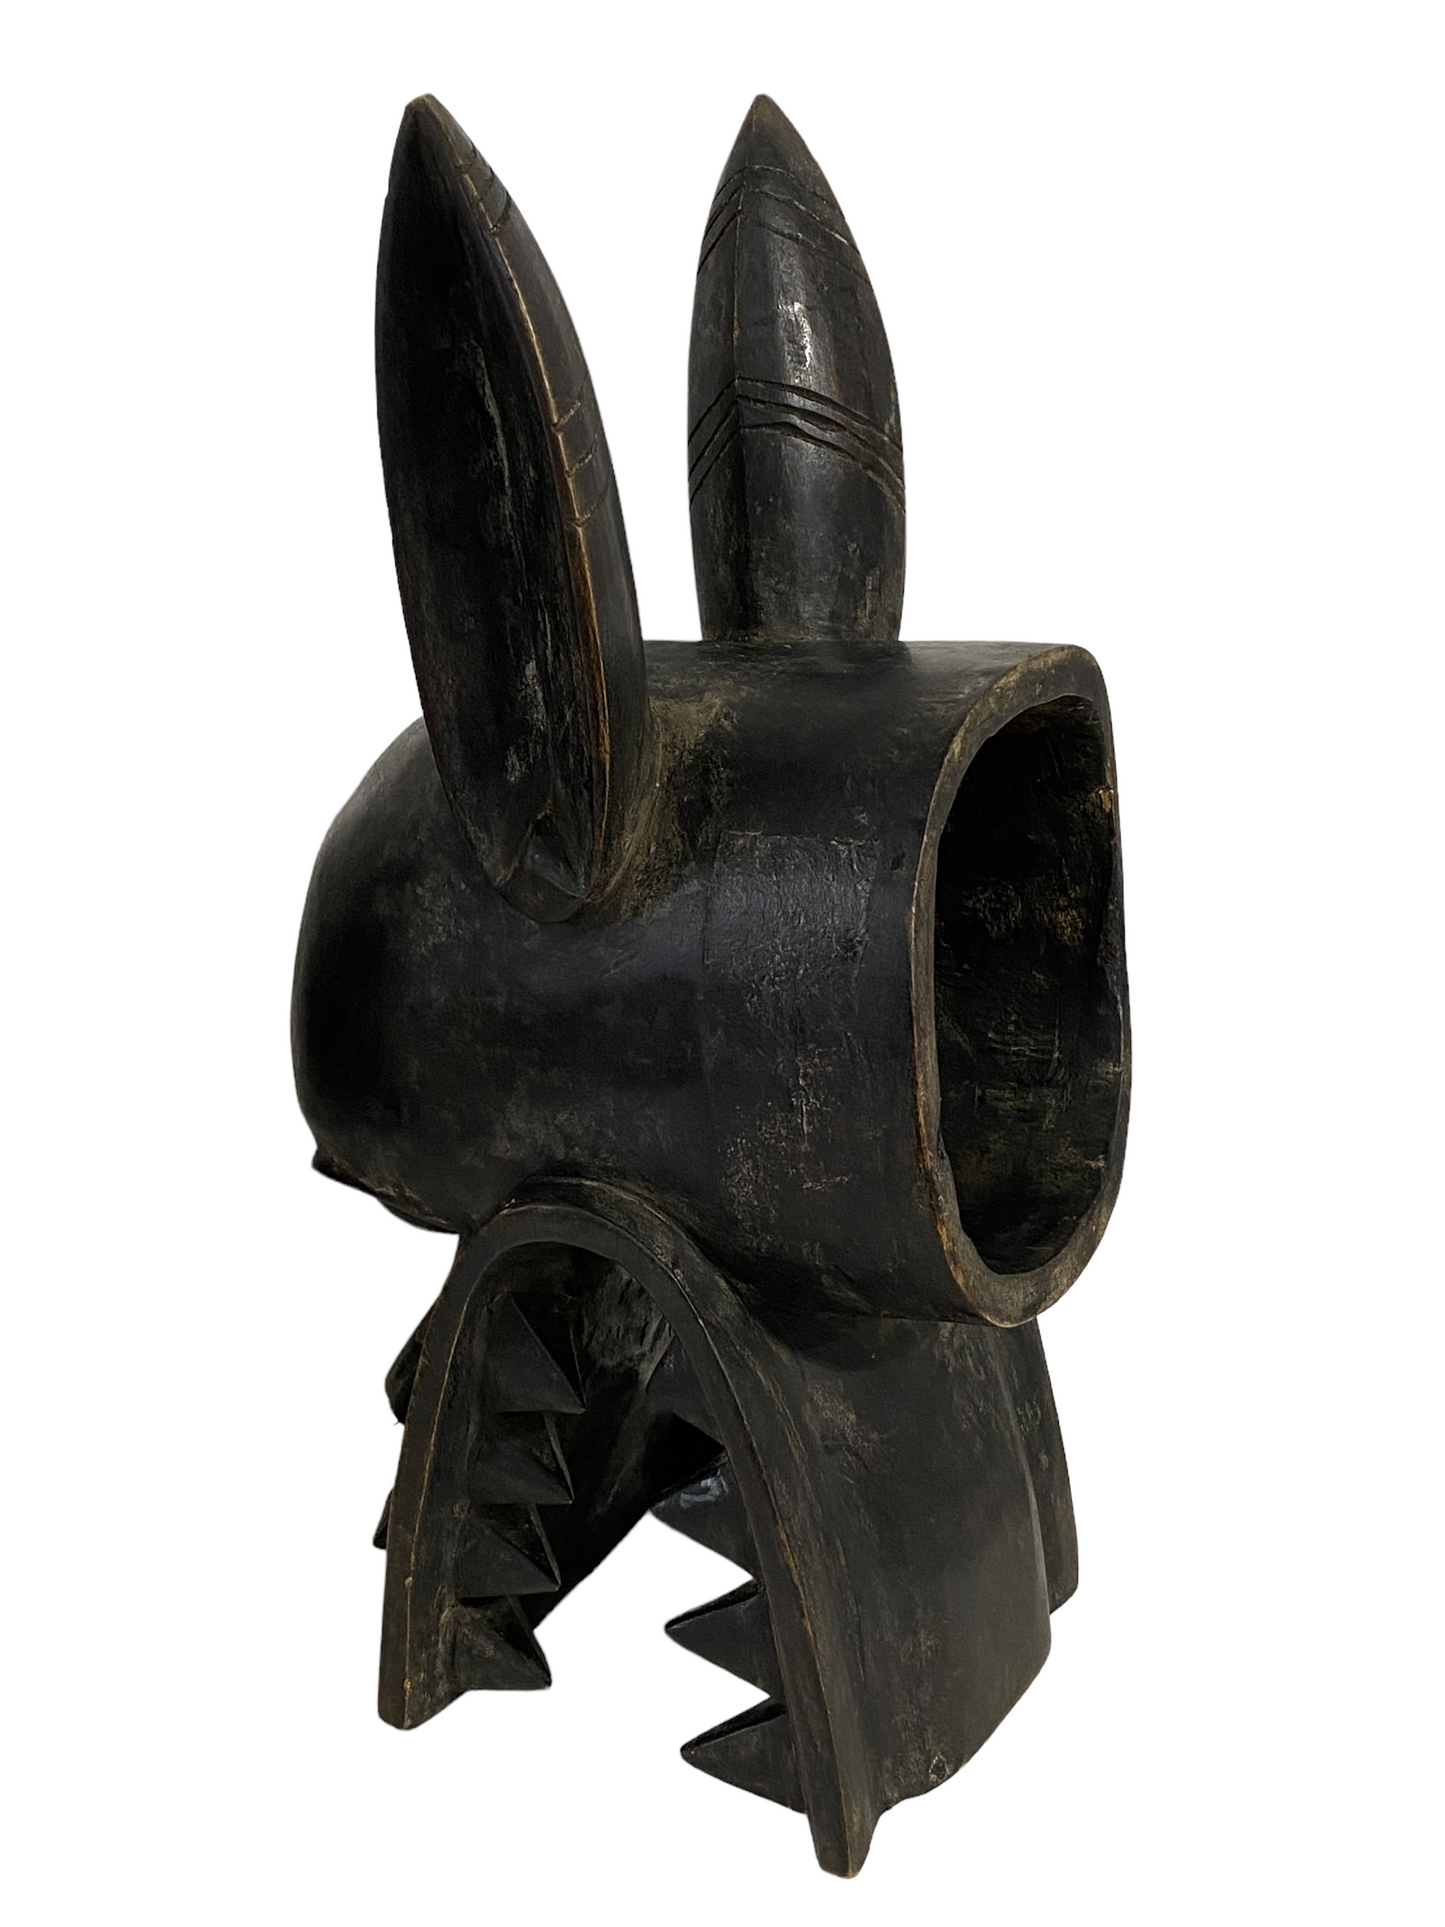 #5142Senufo African Fire Spitter Mask Wanyugo Cote d'Ivoire 21" H